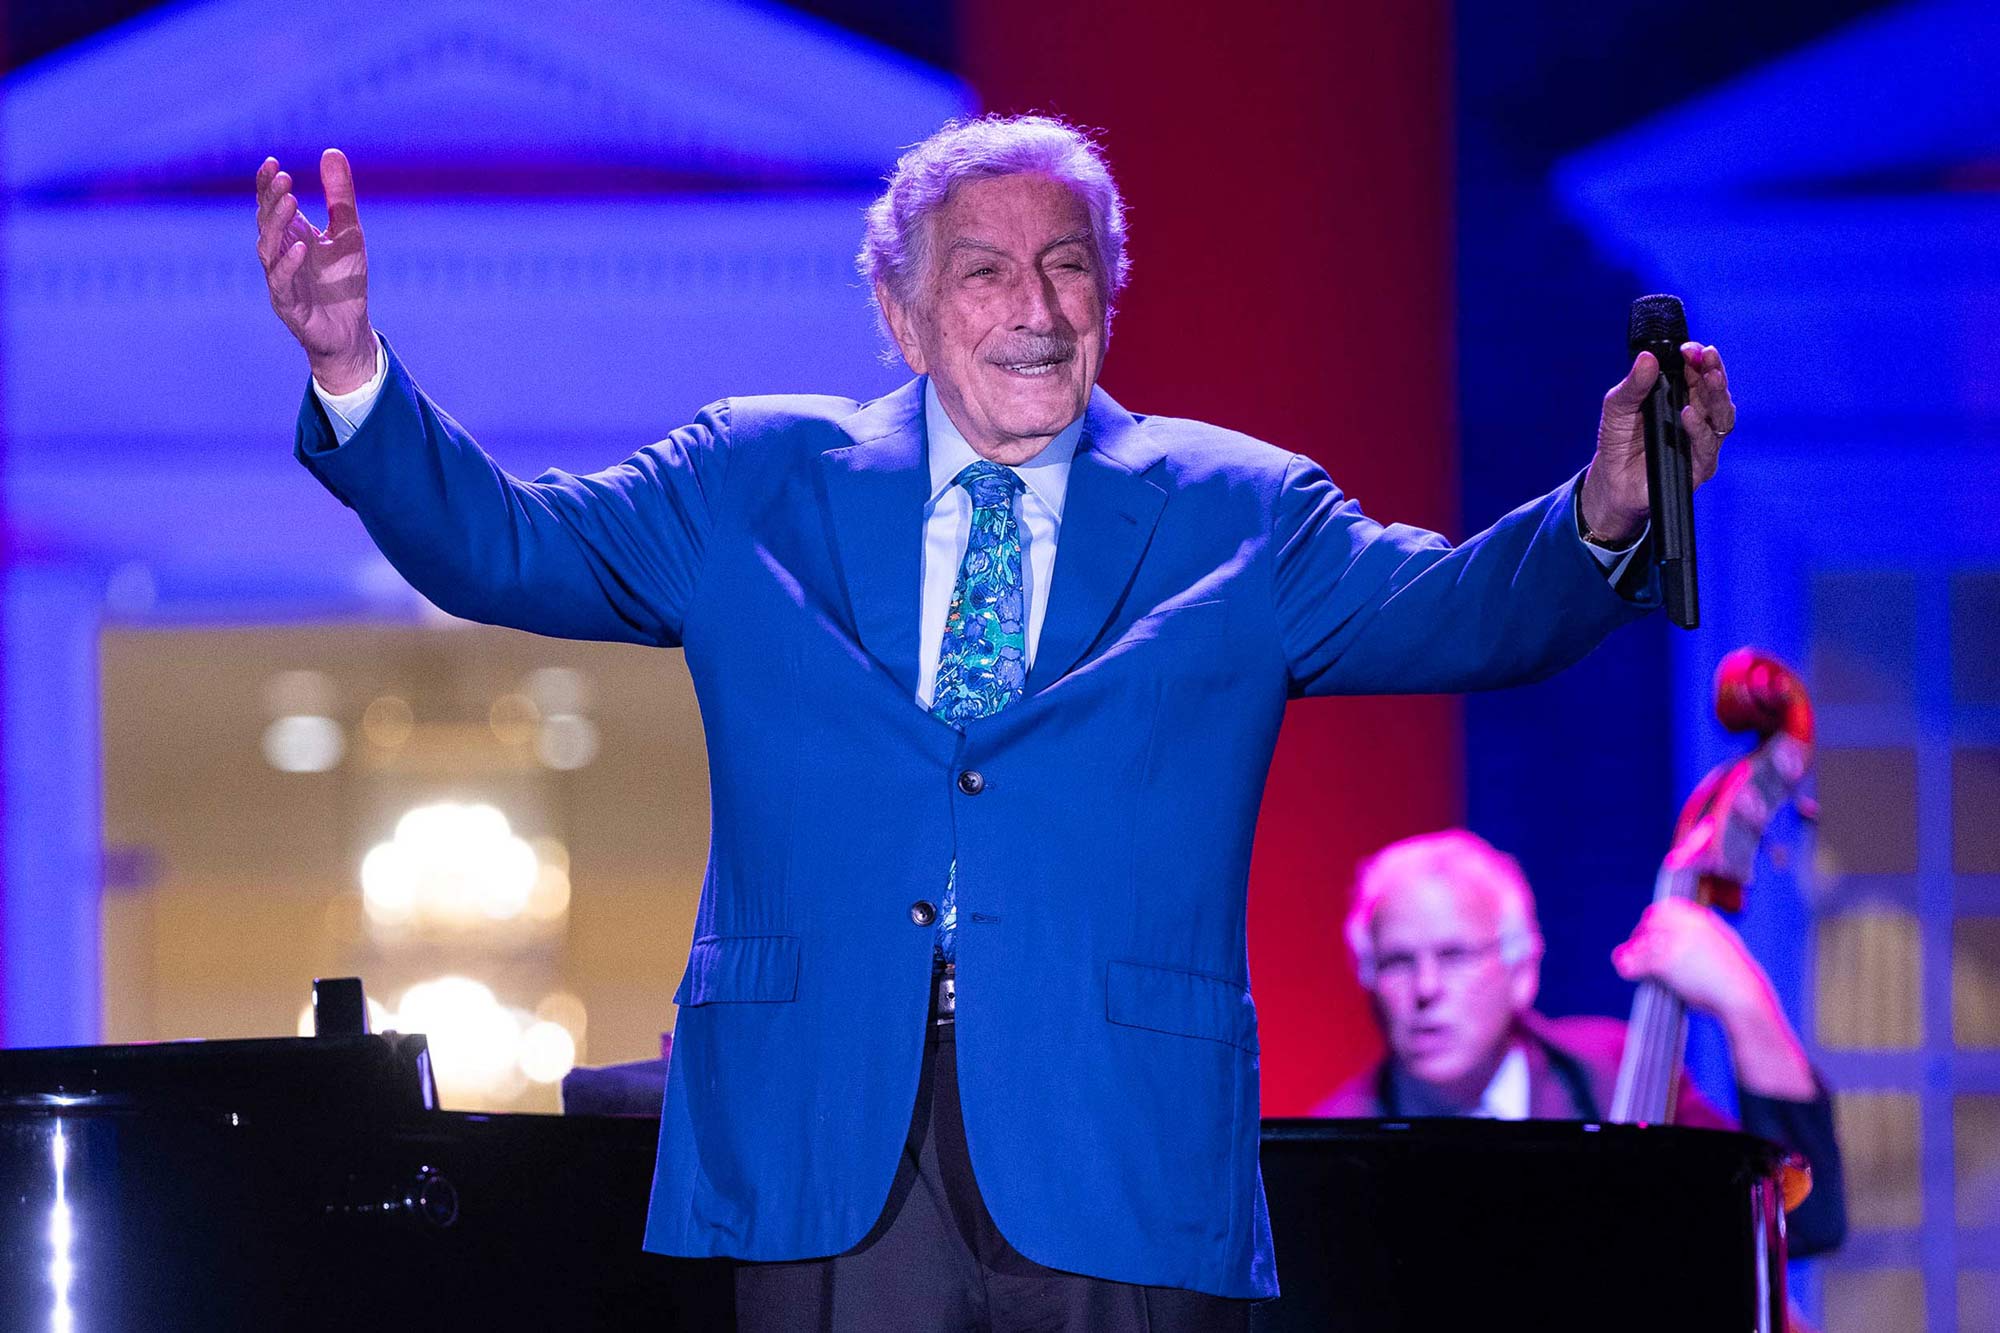 Candid of Tony Bennett on stage in front of the Rotunda